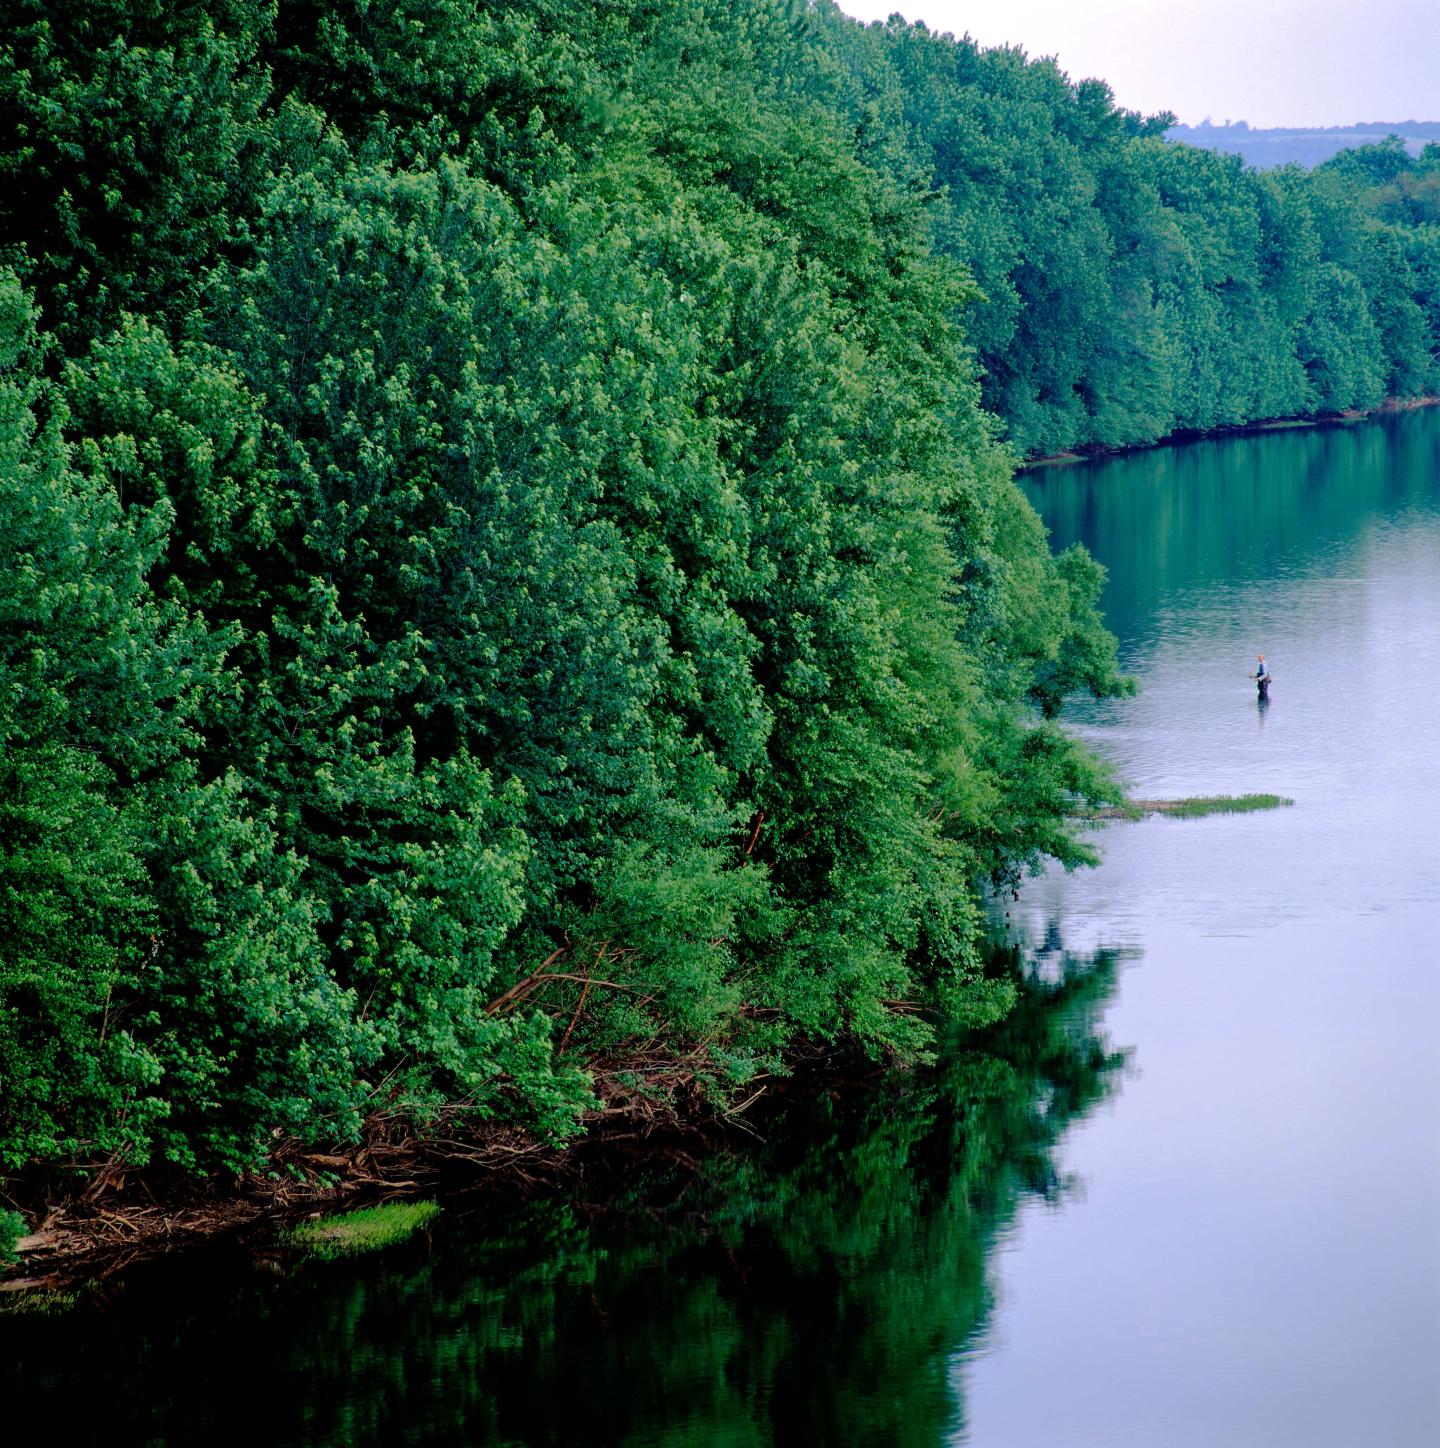 A man wading in the Susquehanna River